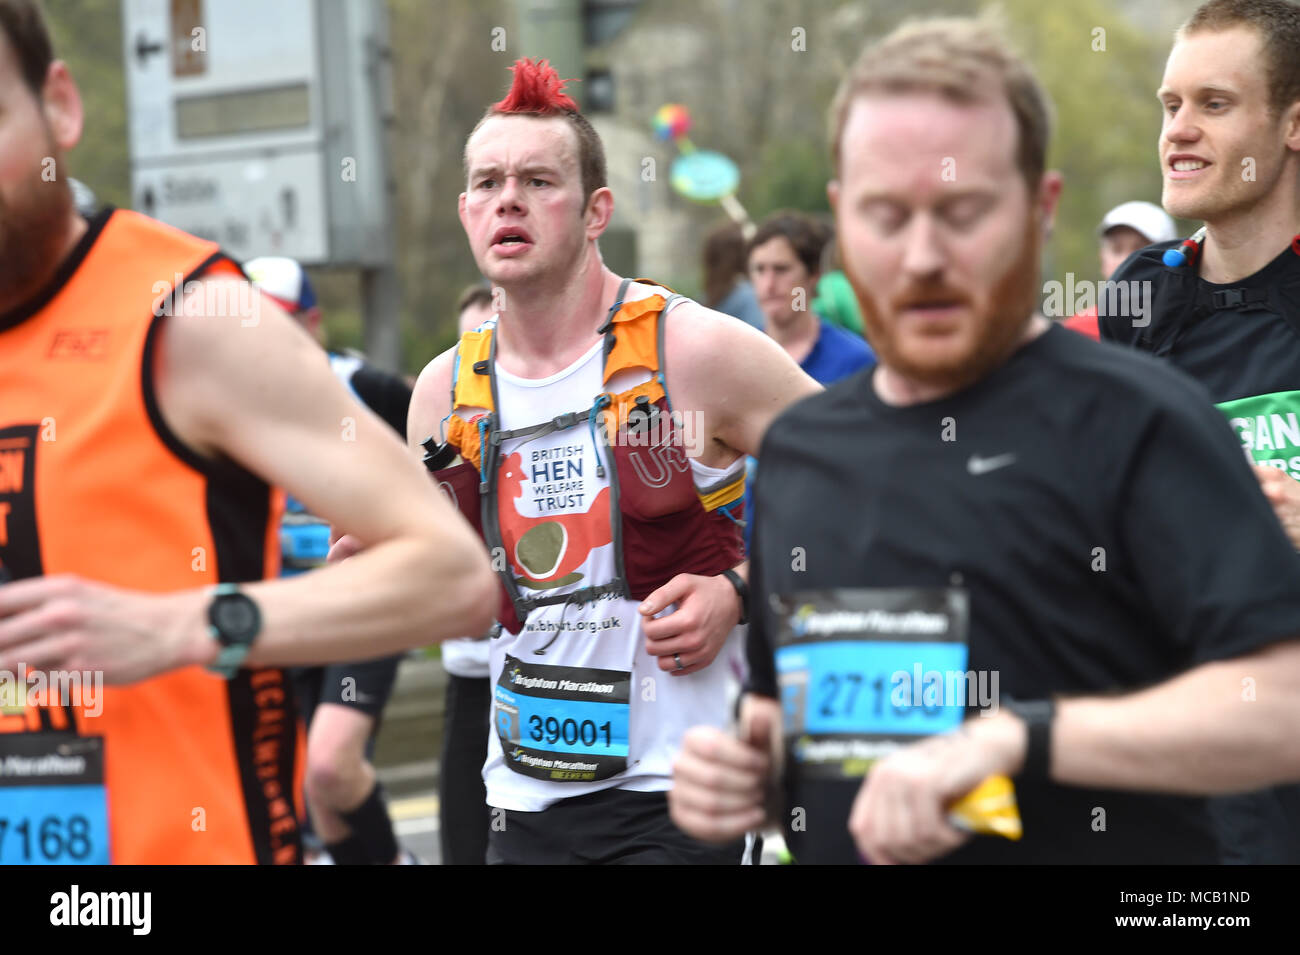 Brighton UK 15th April 2018 - Thousands of runners take part in the Brighton Marathon today as the marathon season gets under way in the UK Credit: Simon Dack/Alamy Live News Stock Photo